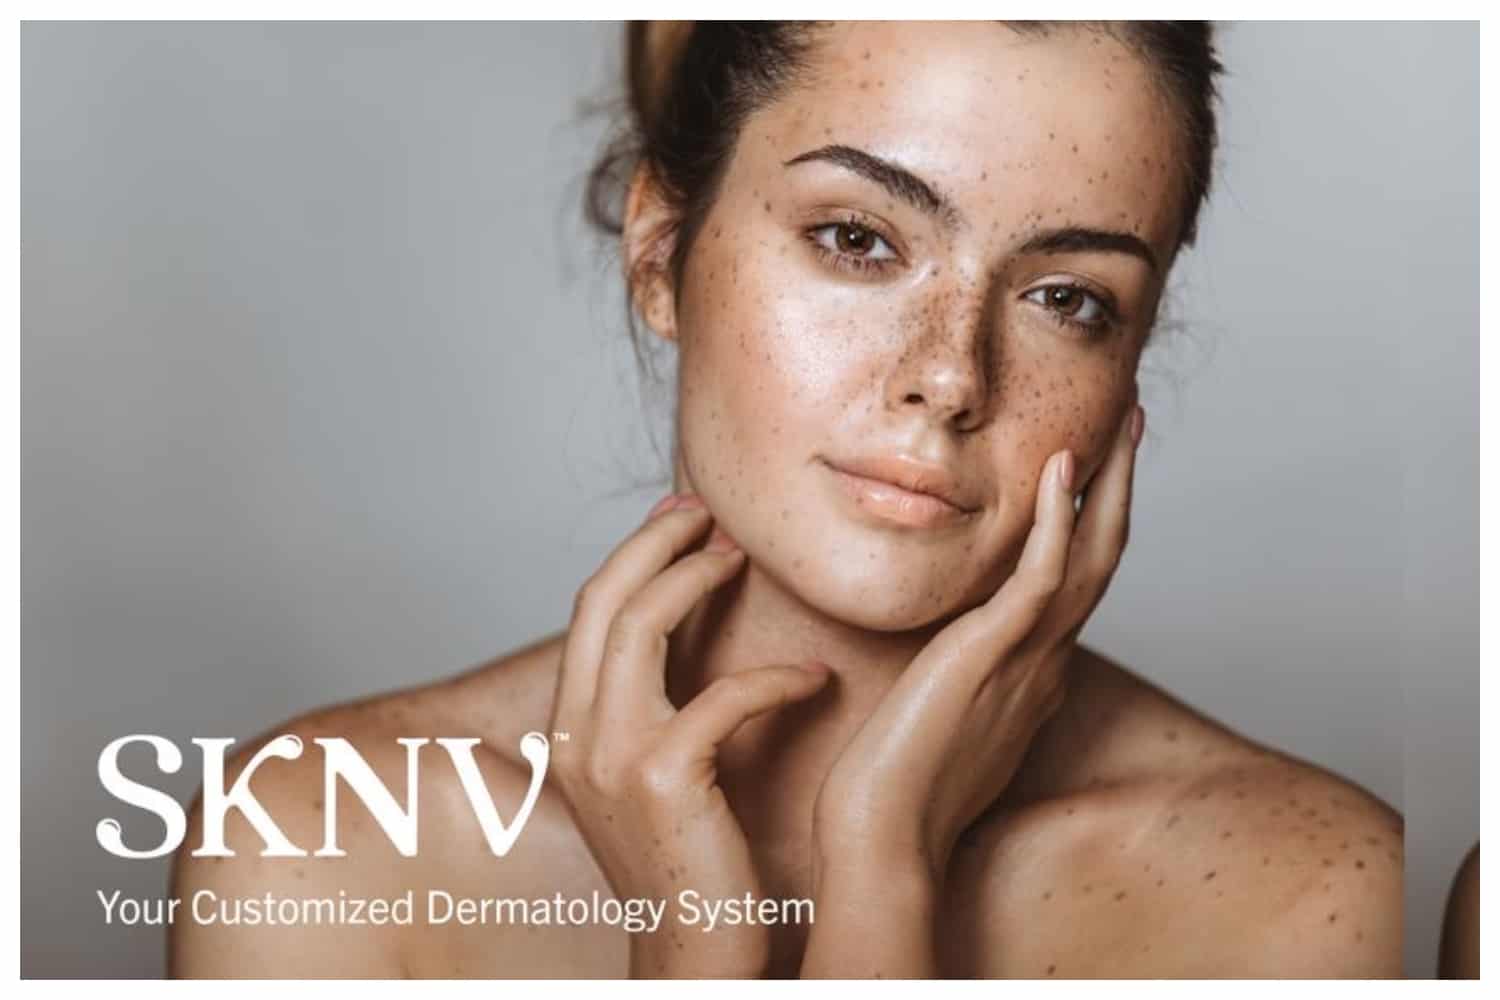 The Right Path for Patients with Sensitive Skin Starts and Stays at Local Dermatology Practices with SKNV